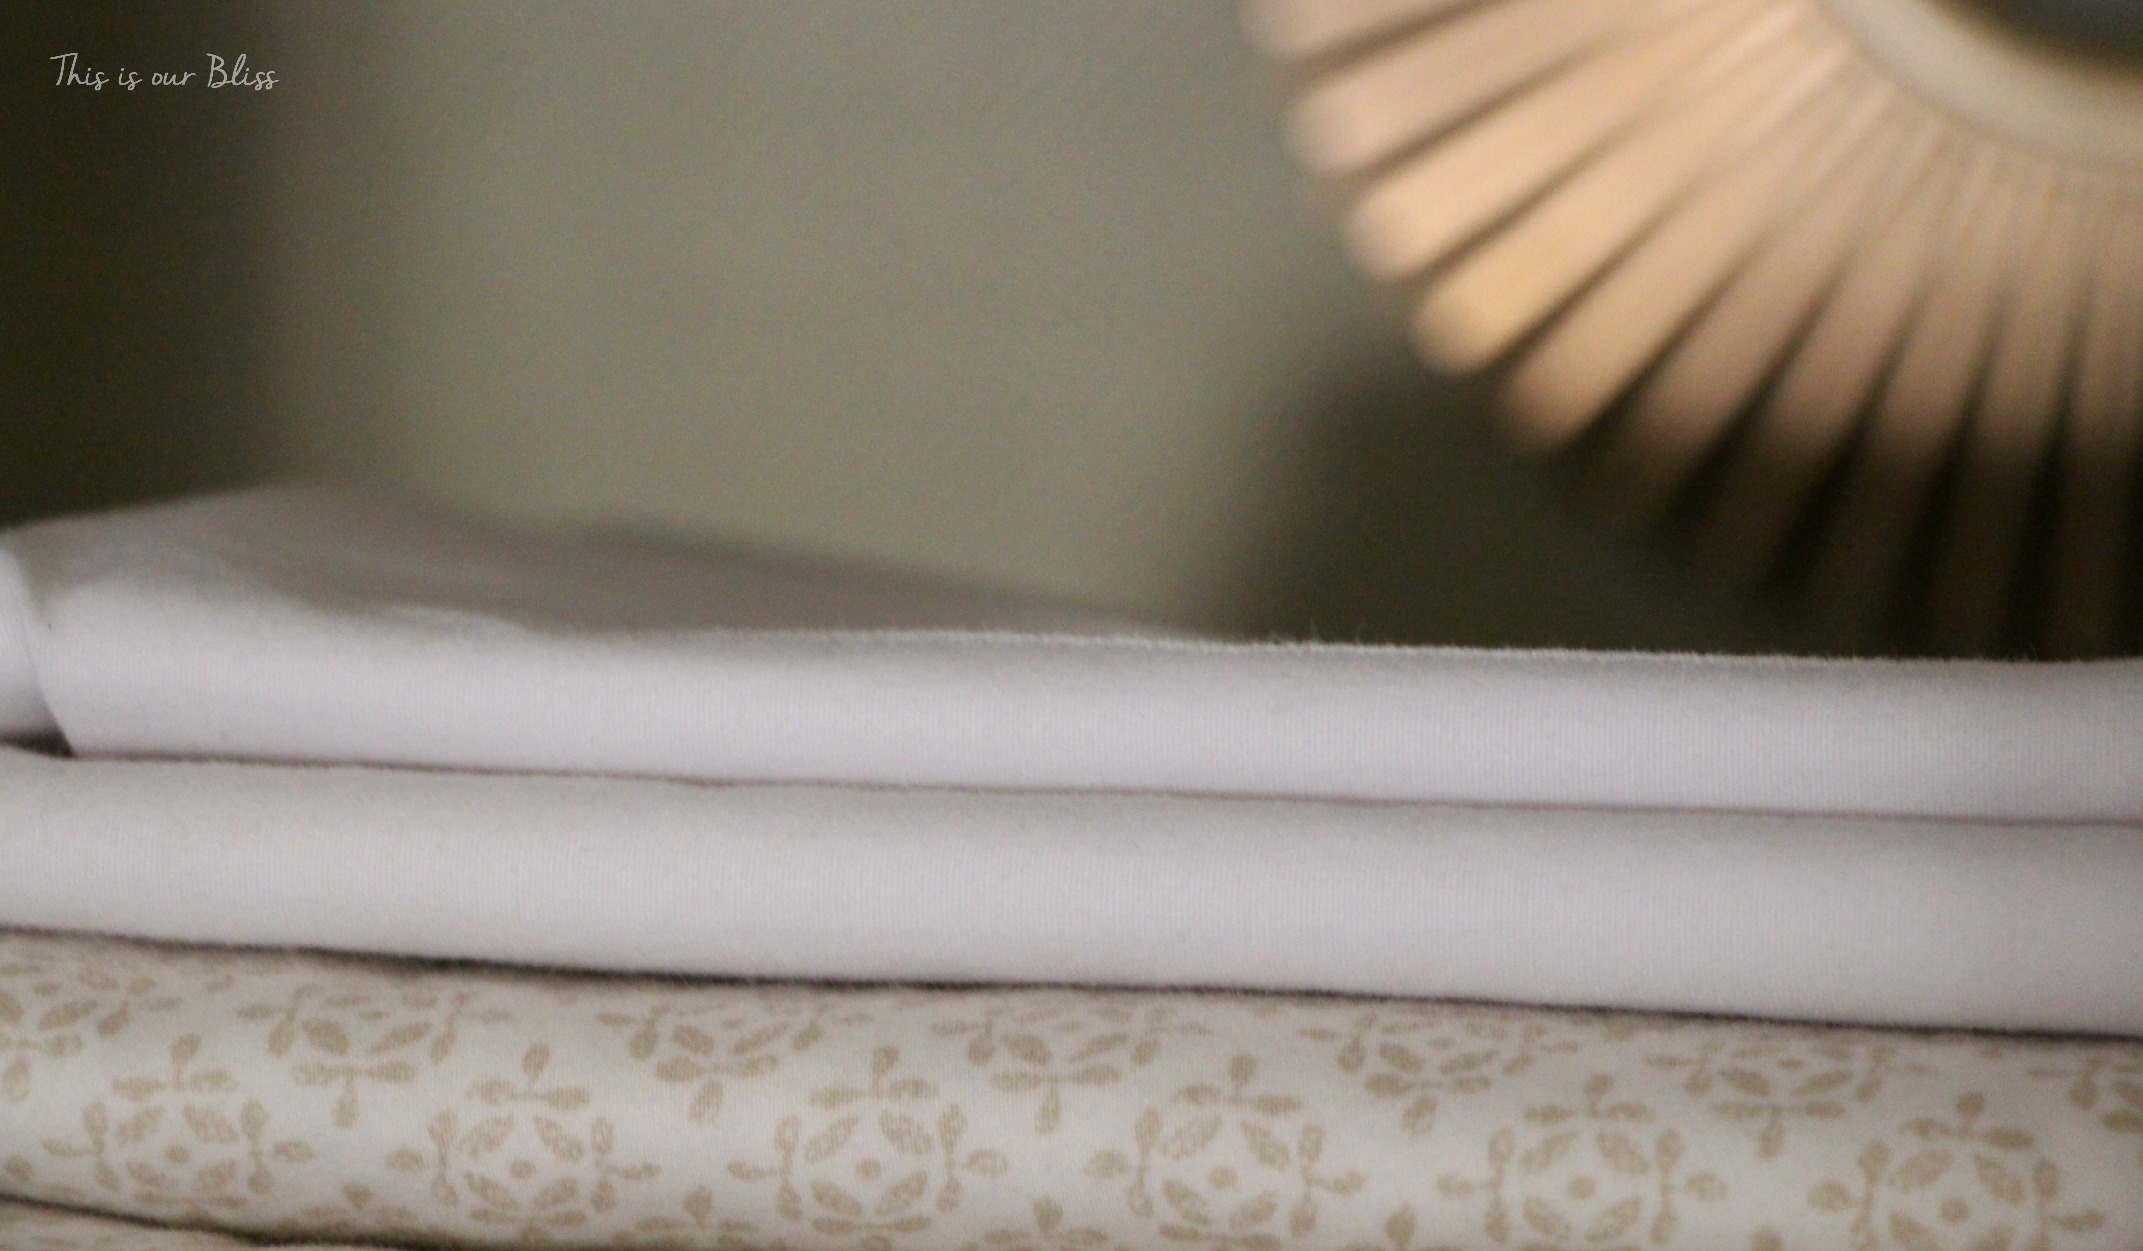 Linen closet makeover details - This is our Bliss